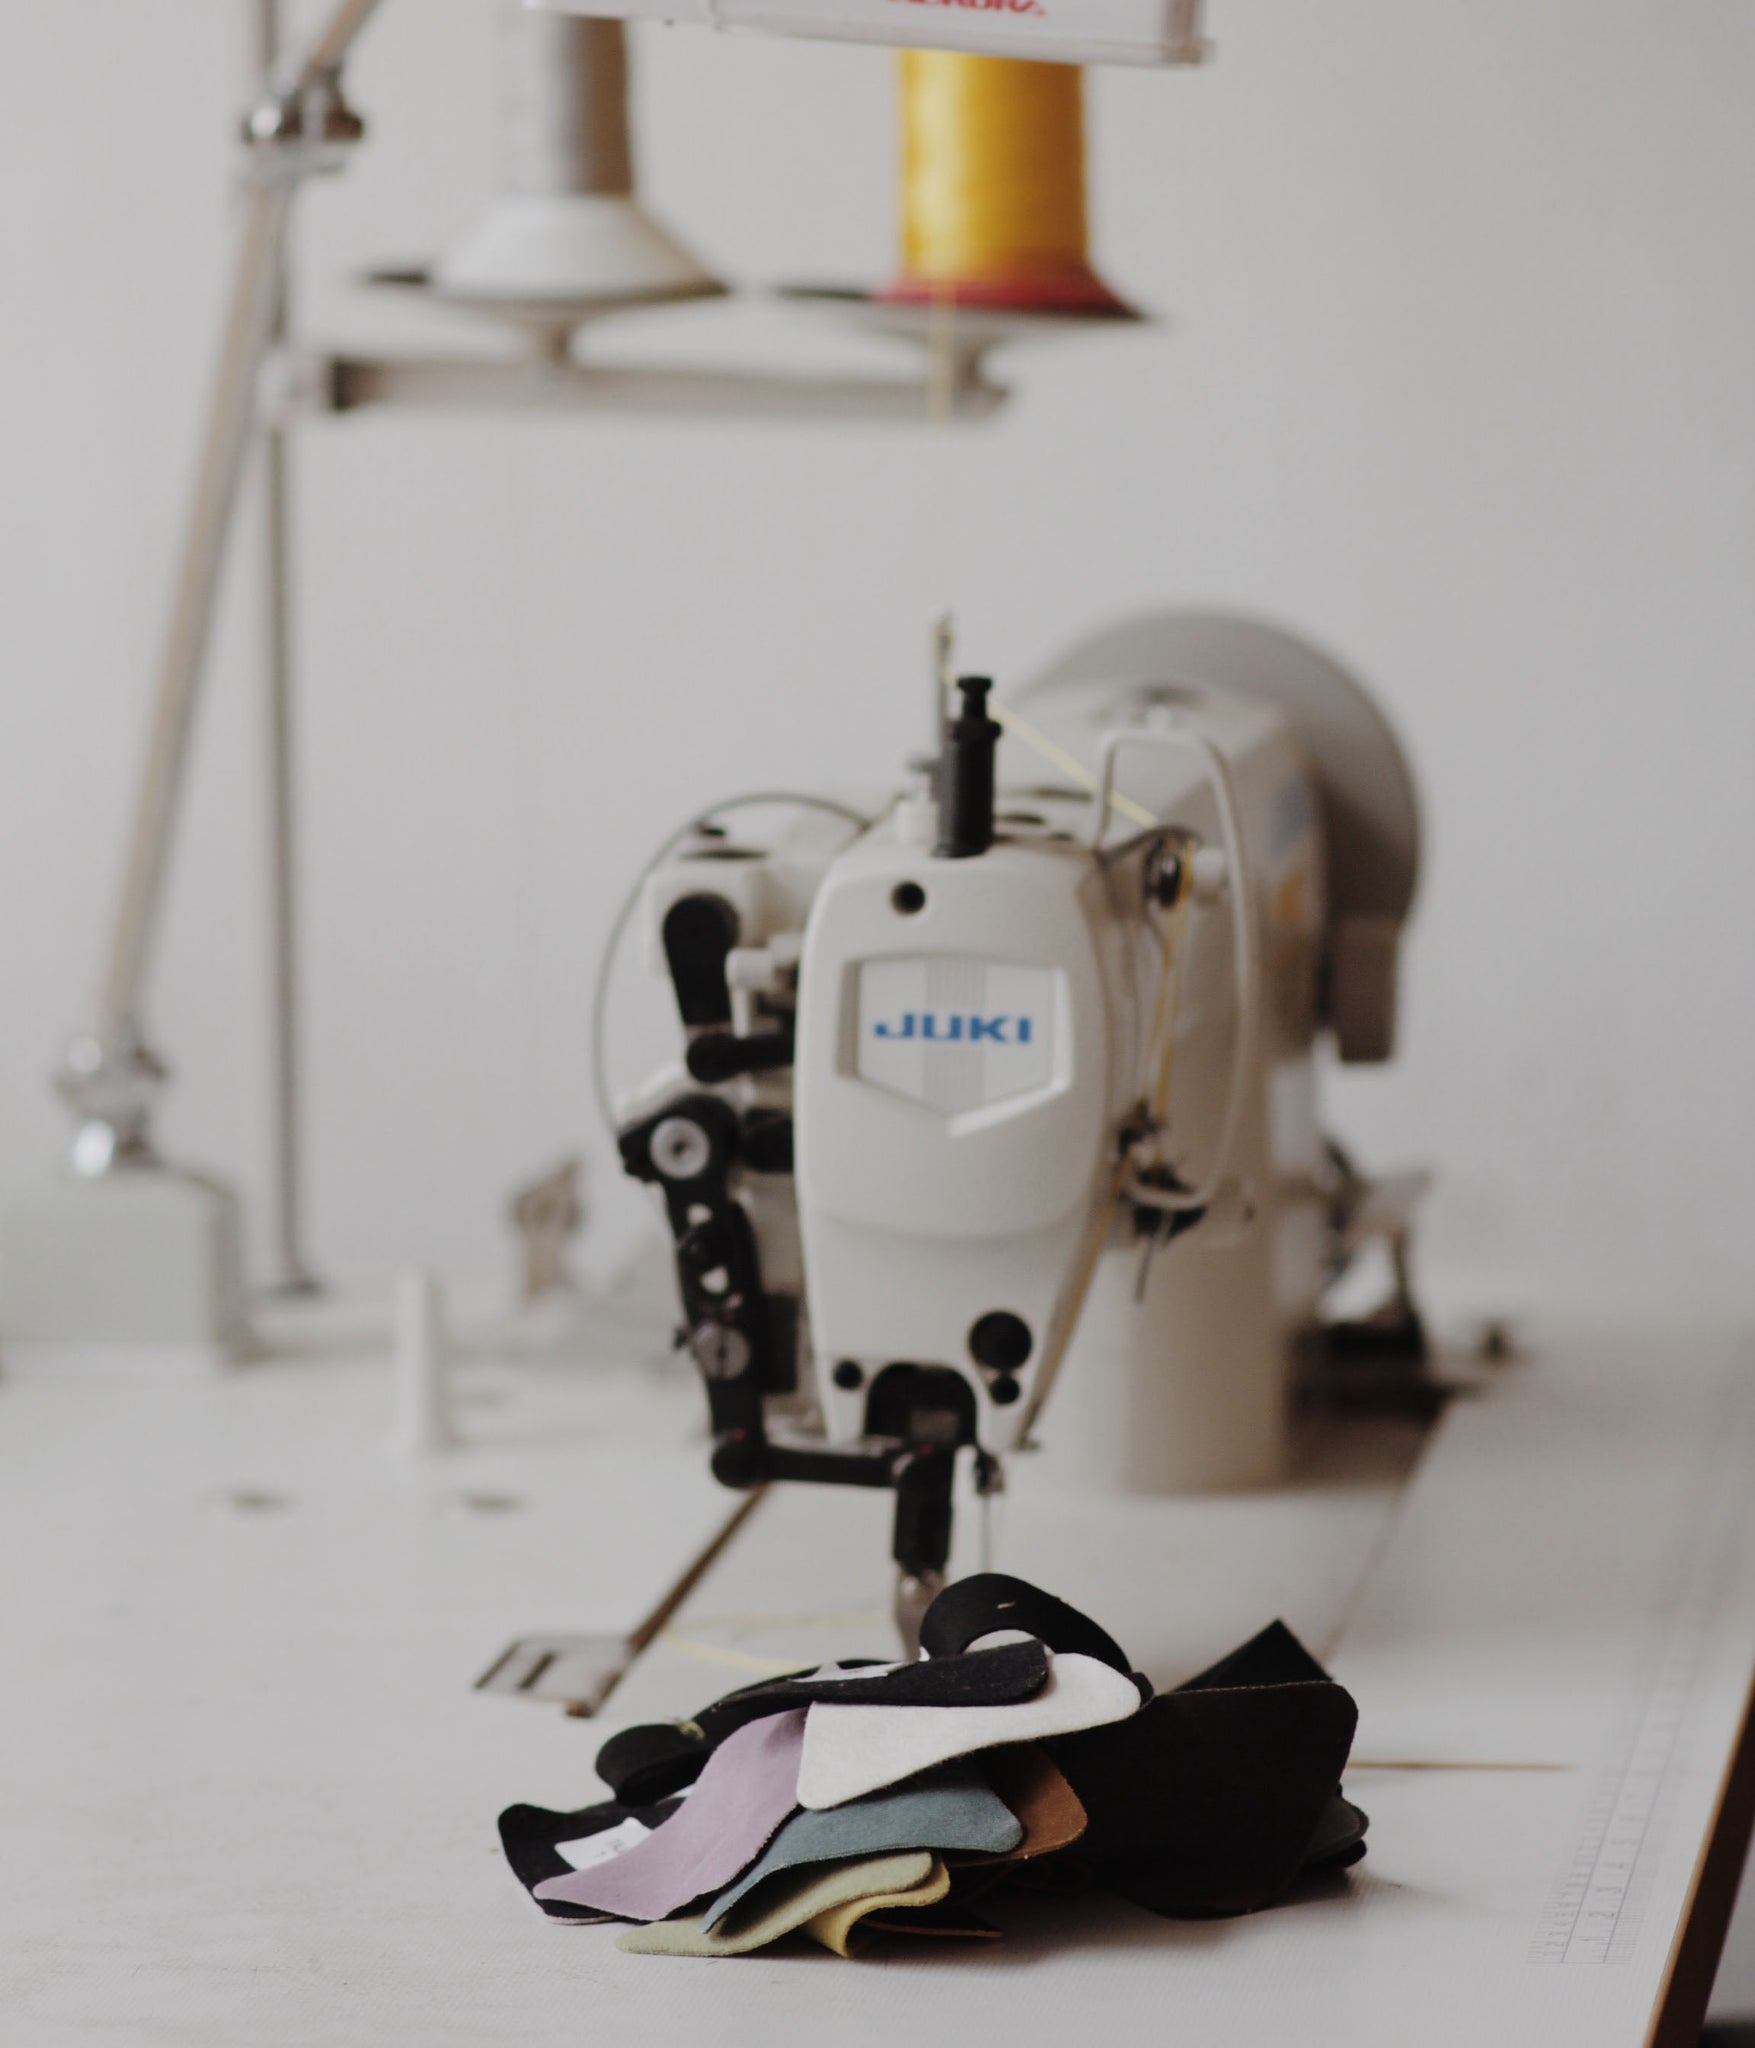 Recommended Sewing Machines for Leather